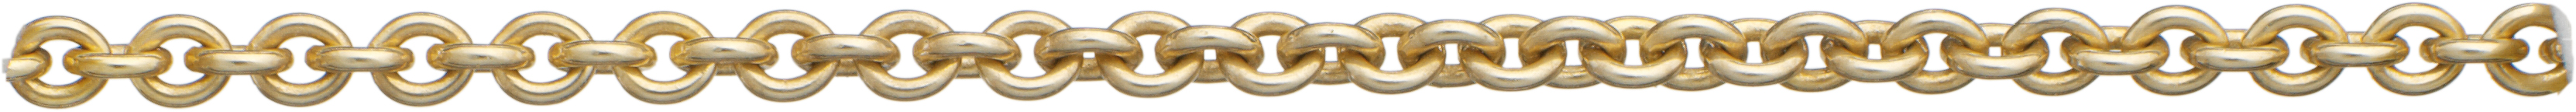 Anchor chain round gold 750/- 2.30mm, wire thickness 0.60mm